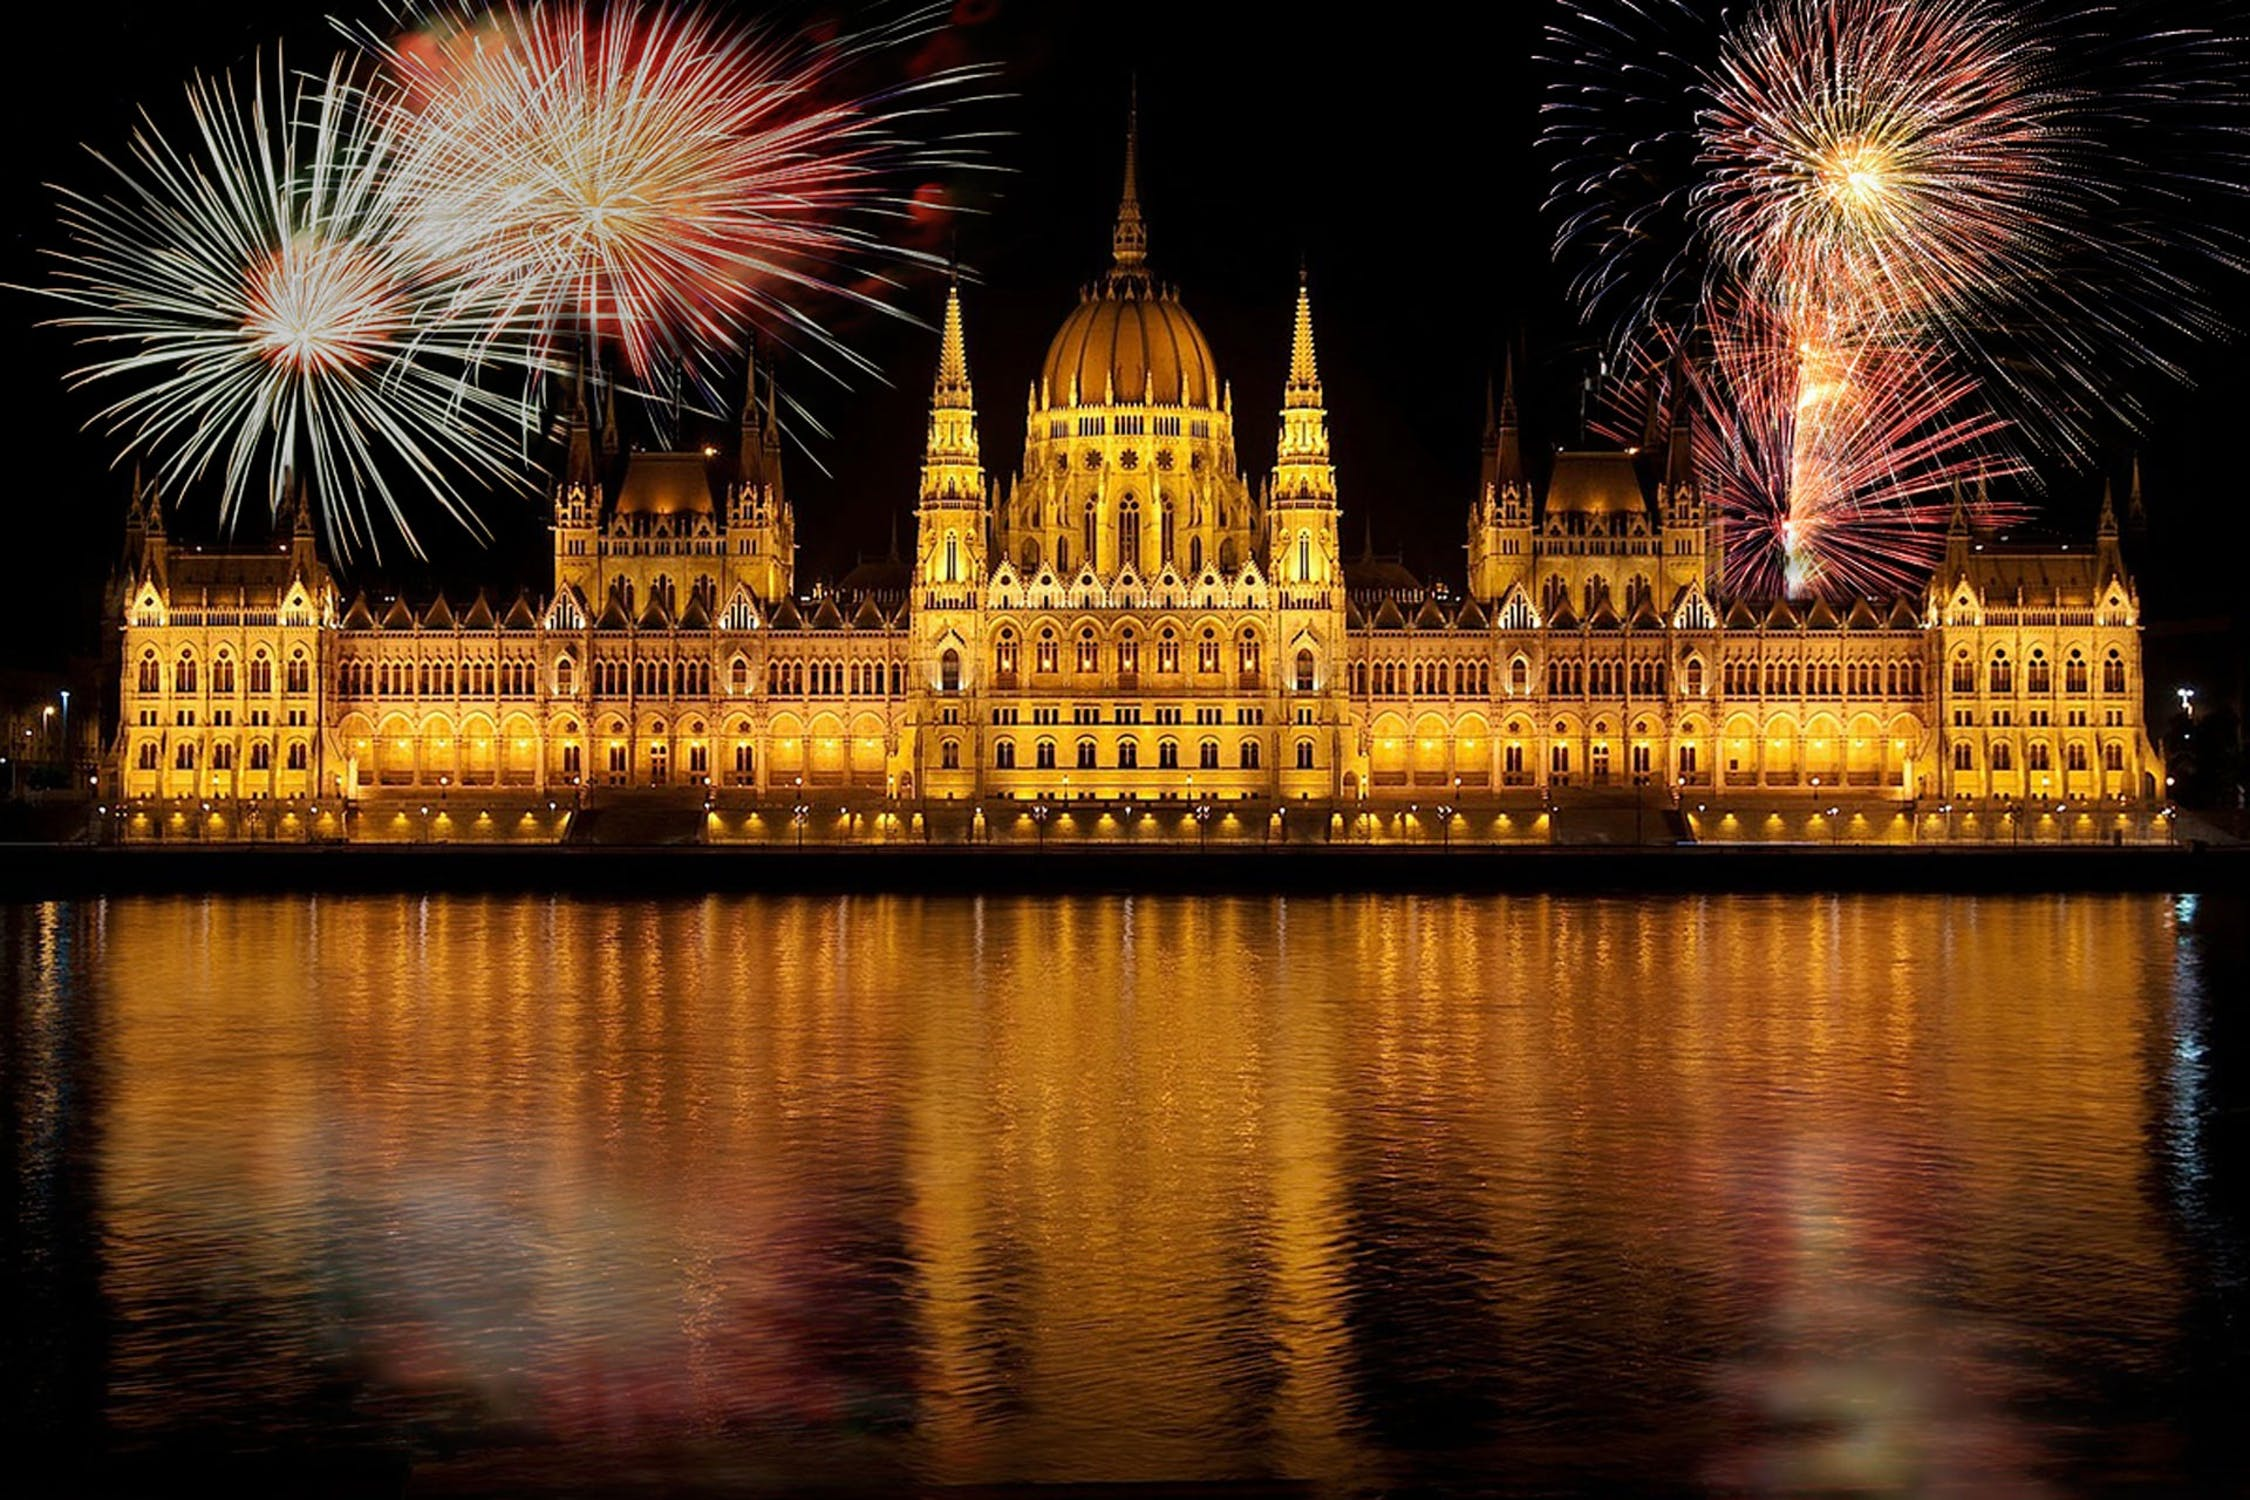 Fireworks over the parliament